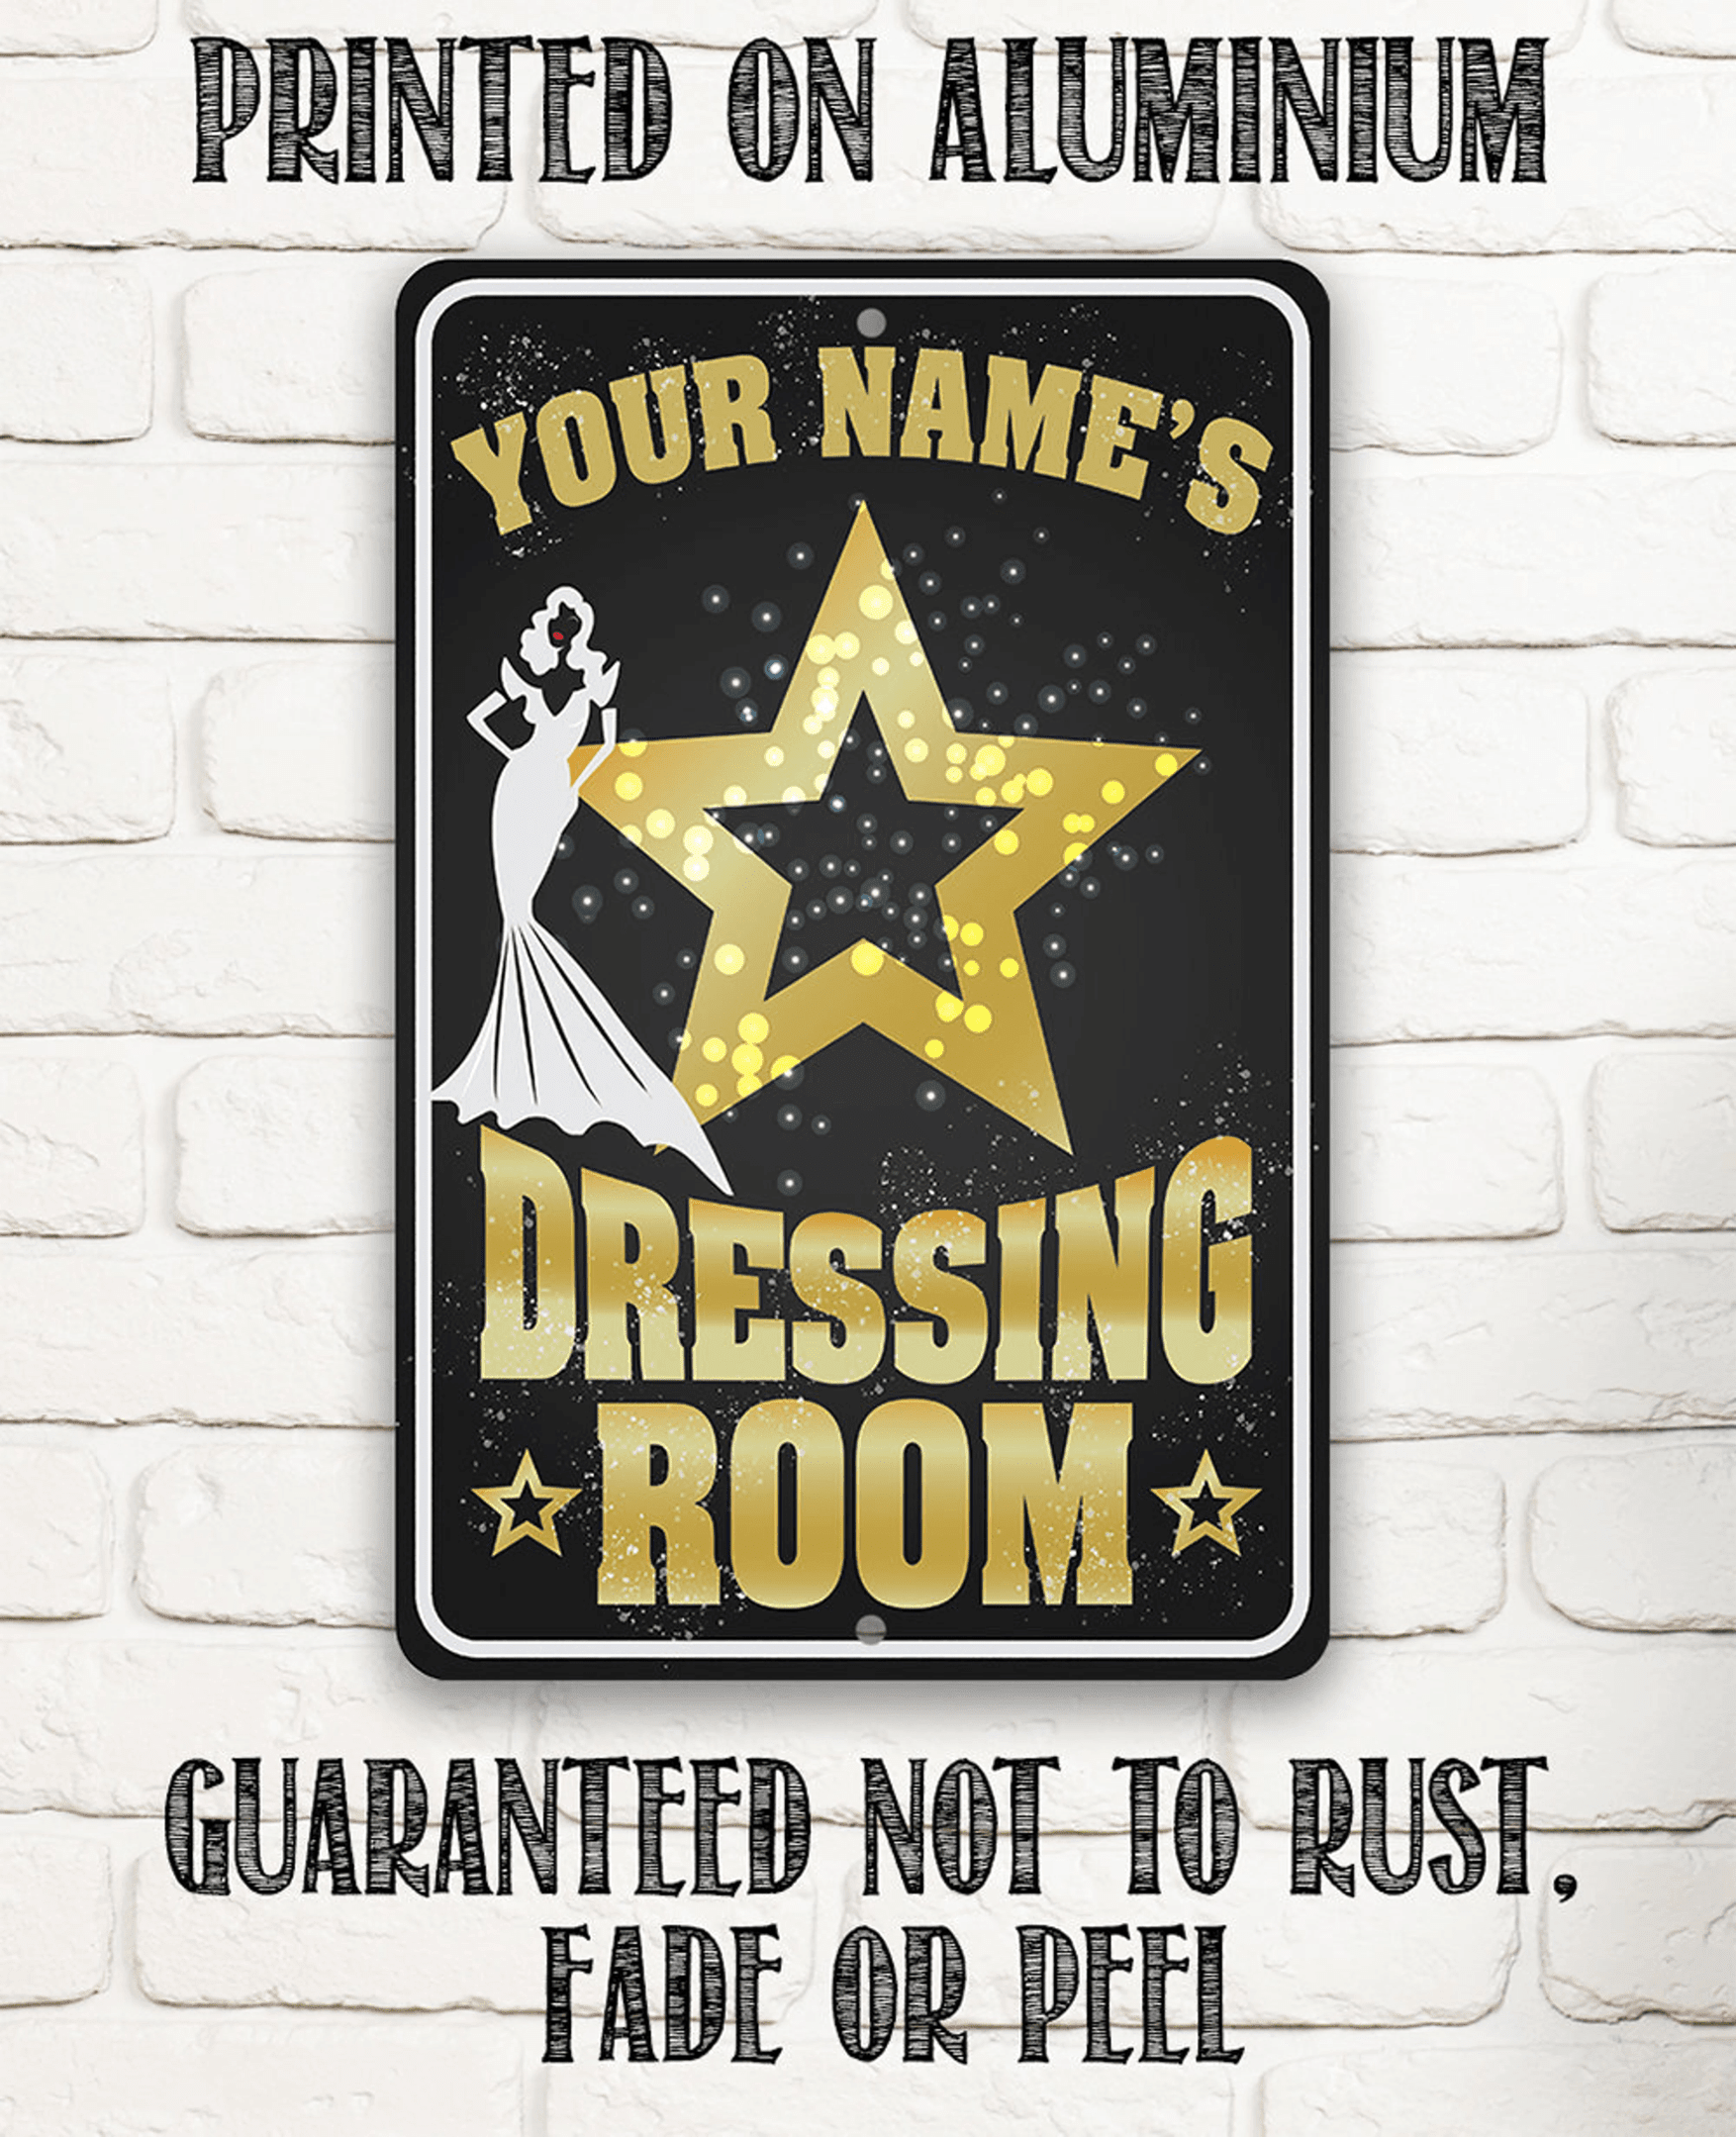 Tin Personalized Dressing Room Metal Sign 8&quot; x12&quot; or 12&quot;x18&quot; Use Indoor Outdoor Great Gift and Decor